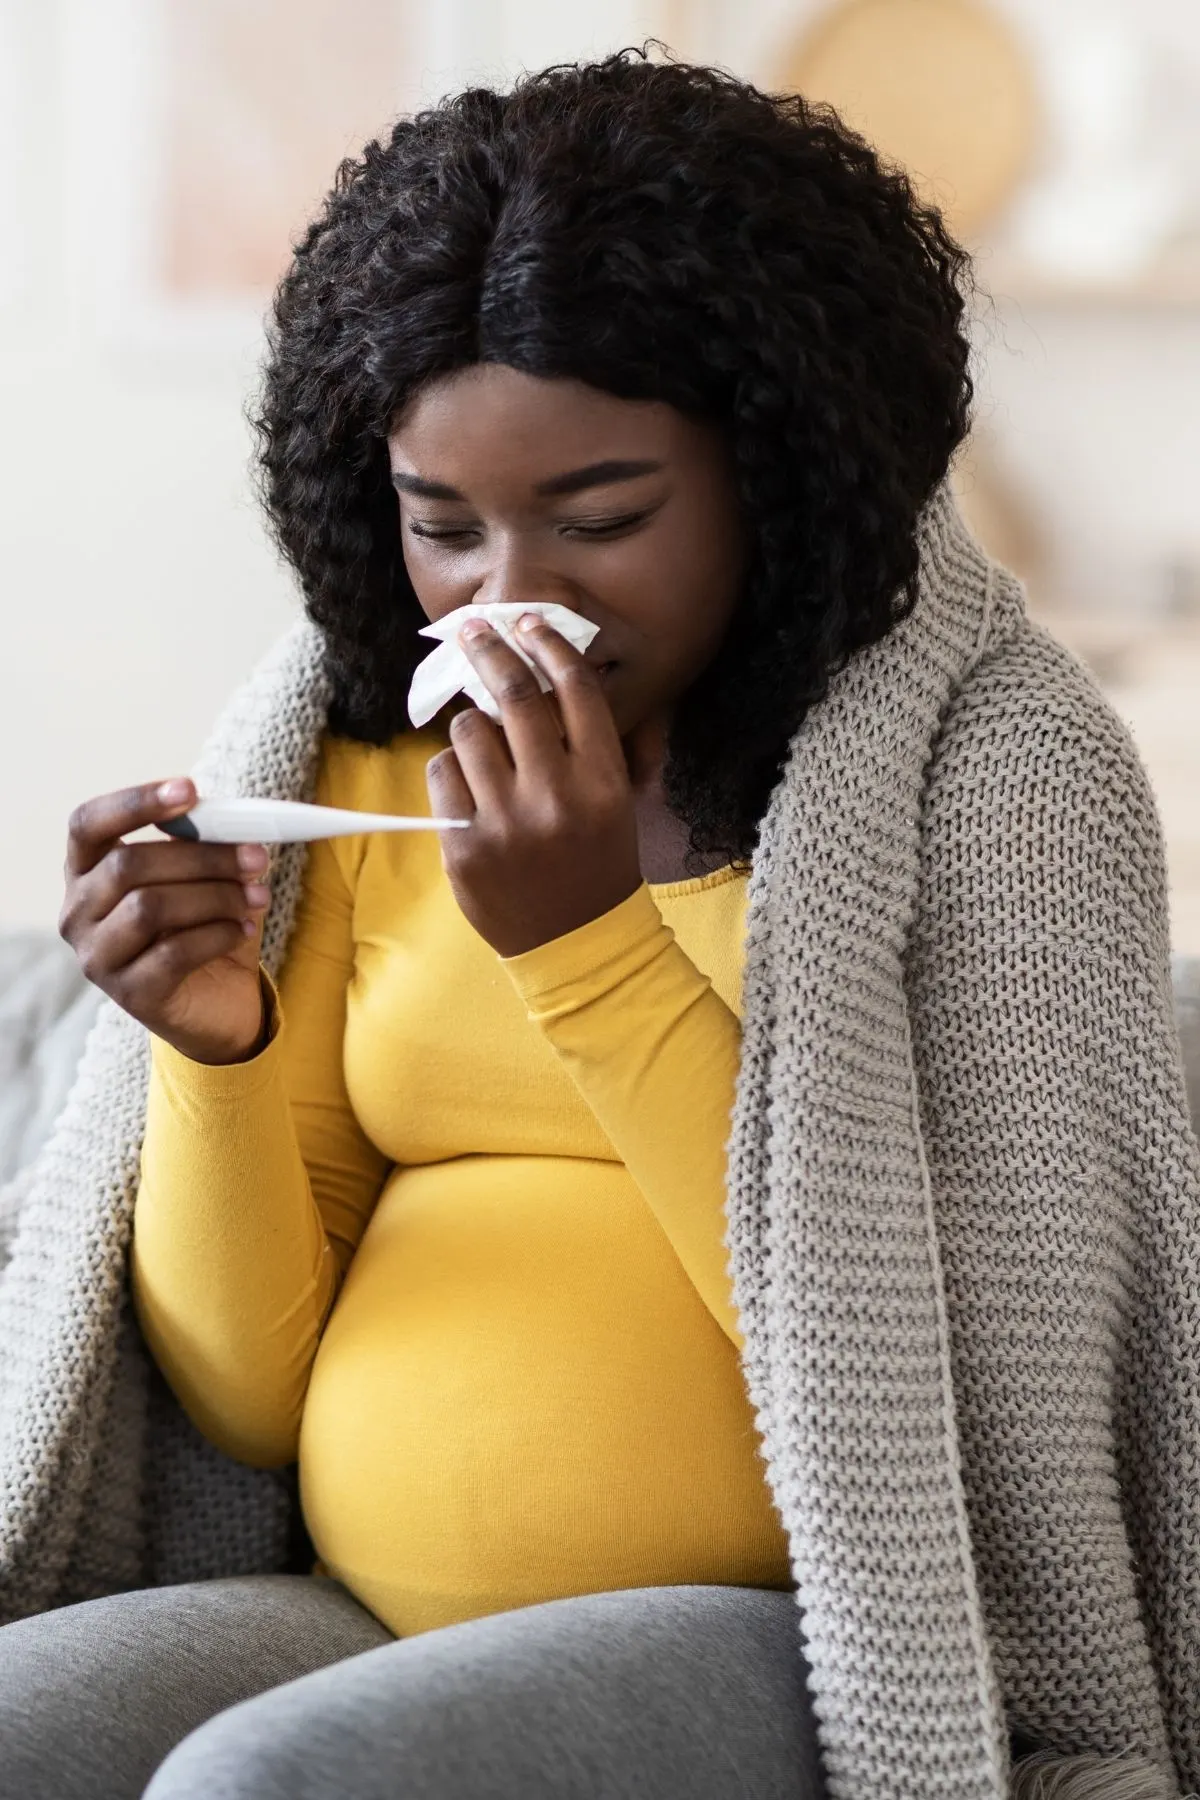 Pregnant woman with blanket over back blows her nose and checks temperature.